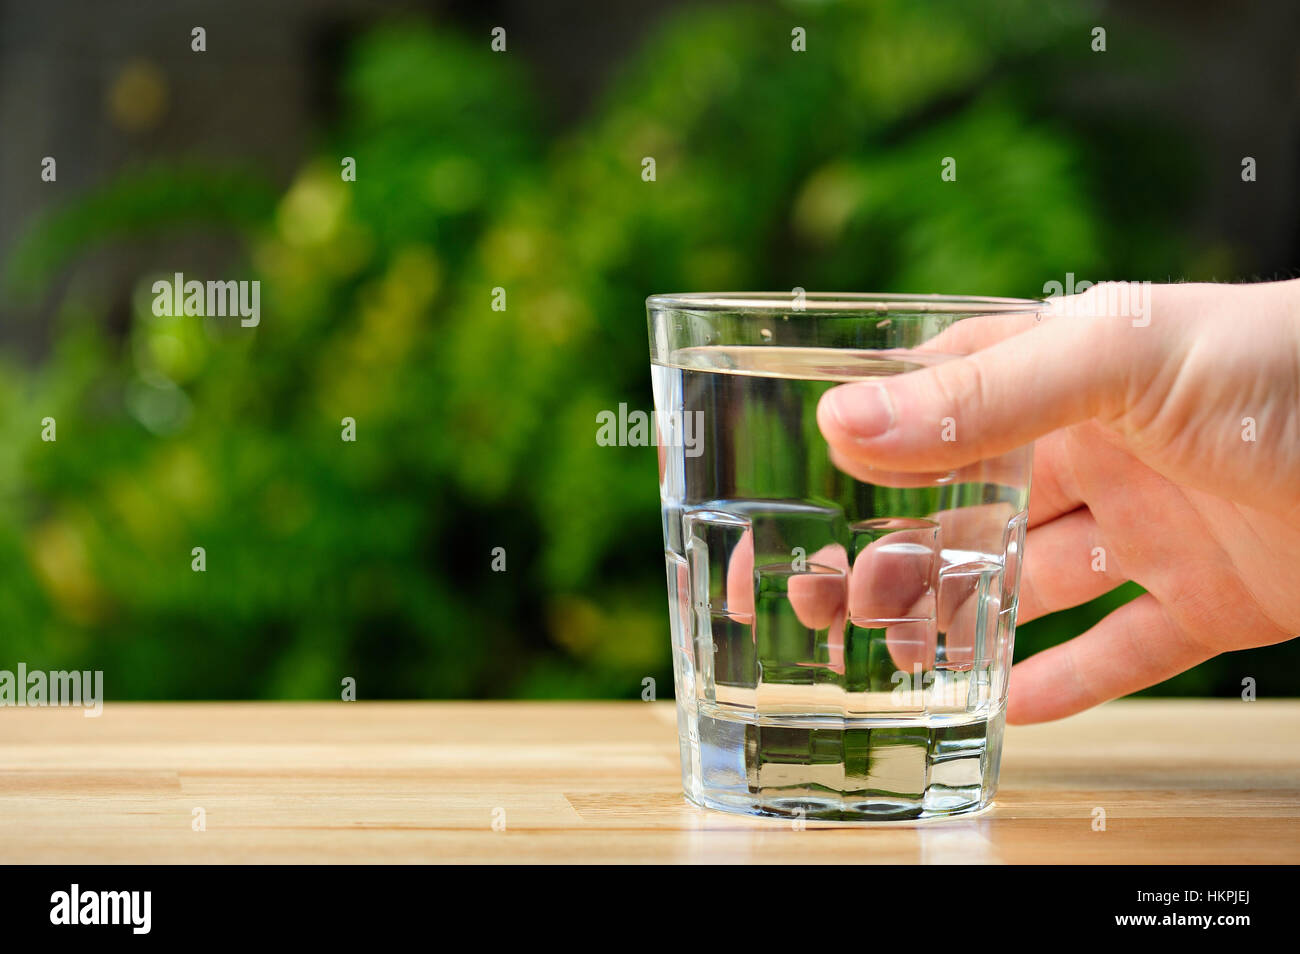 glass of water in hand on table in green park background Stock Photo